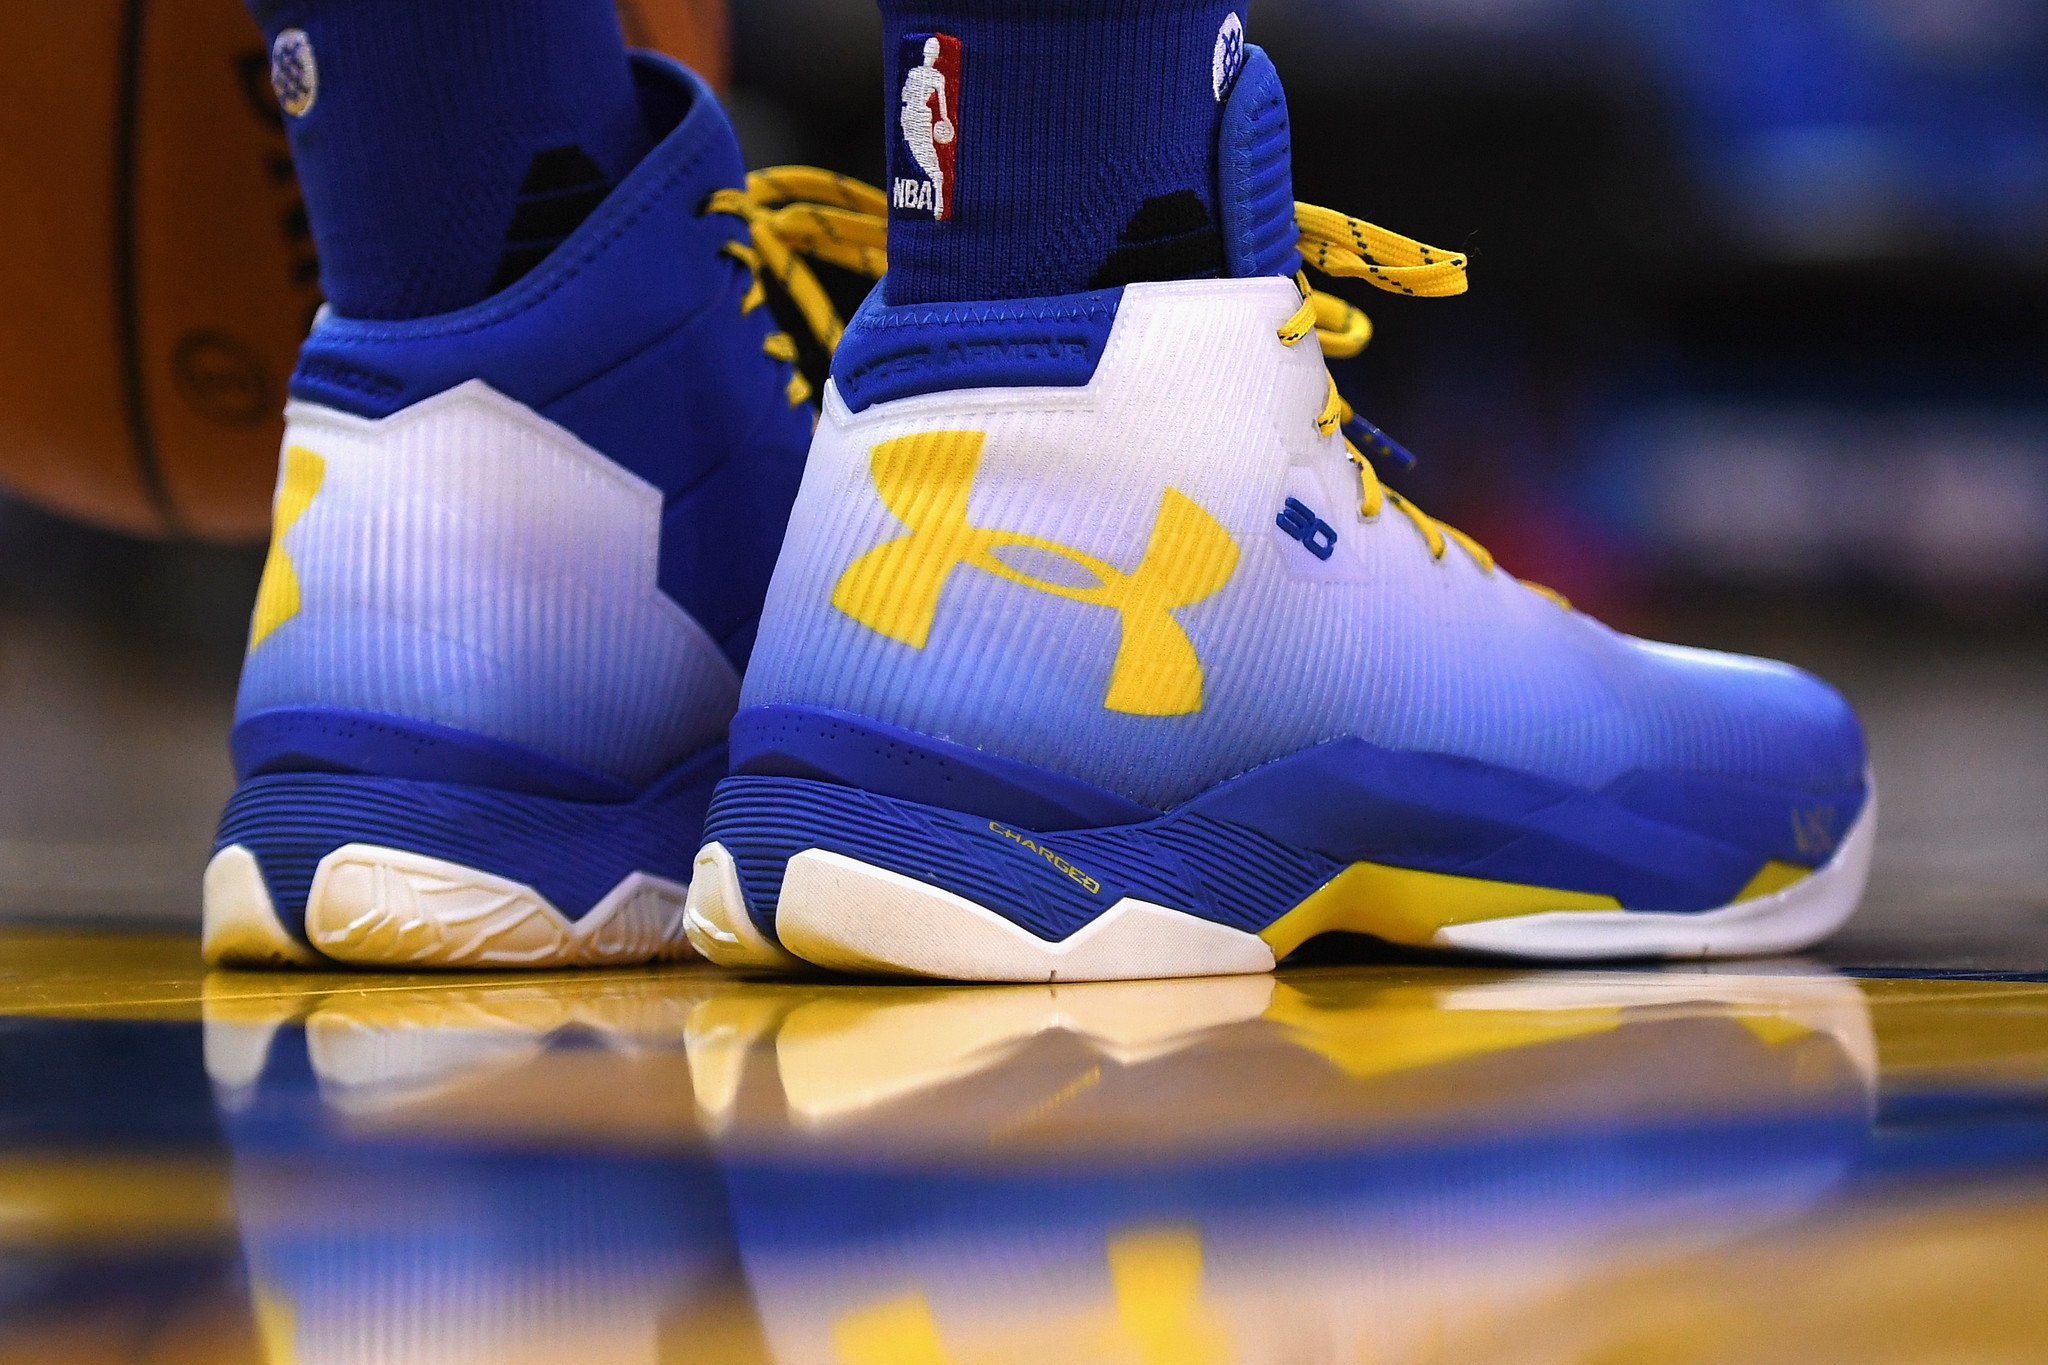 Under Armour shares plunge after rare swing and miss in 4Q - Chicago ...